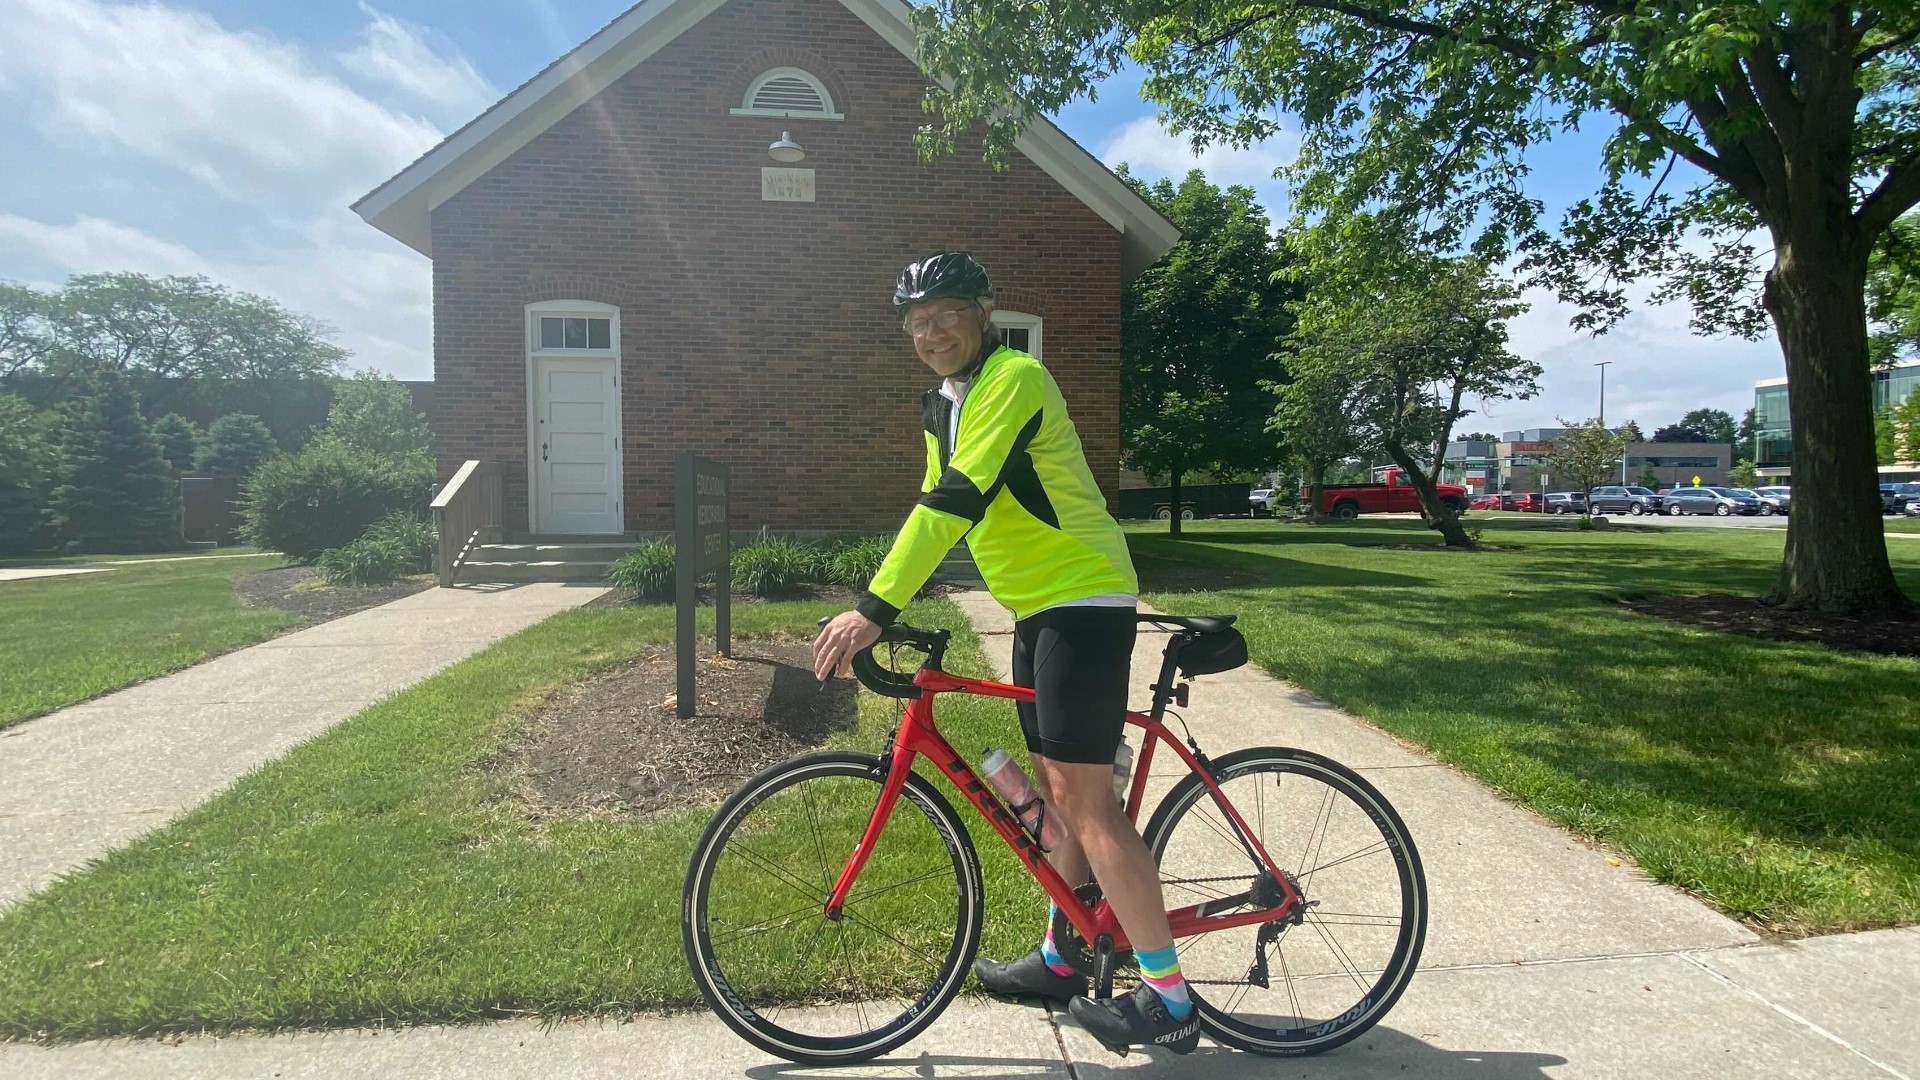 Chris Willis plans to stop in 51 school districts and while he's there, donate $1,000 of what he's raised along the way.